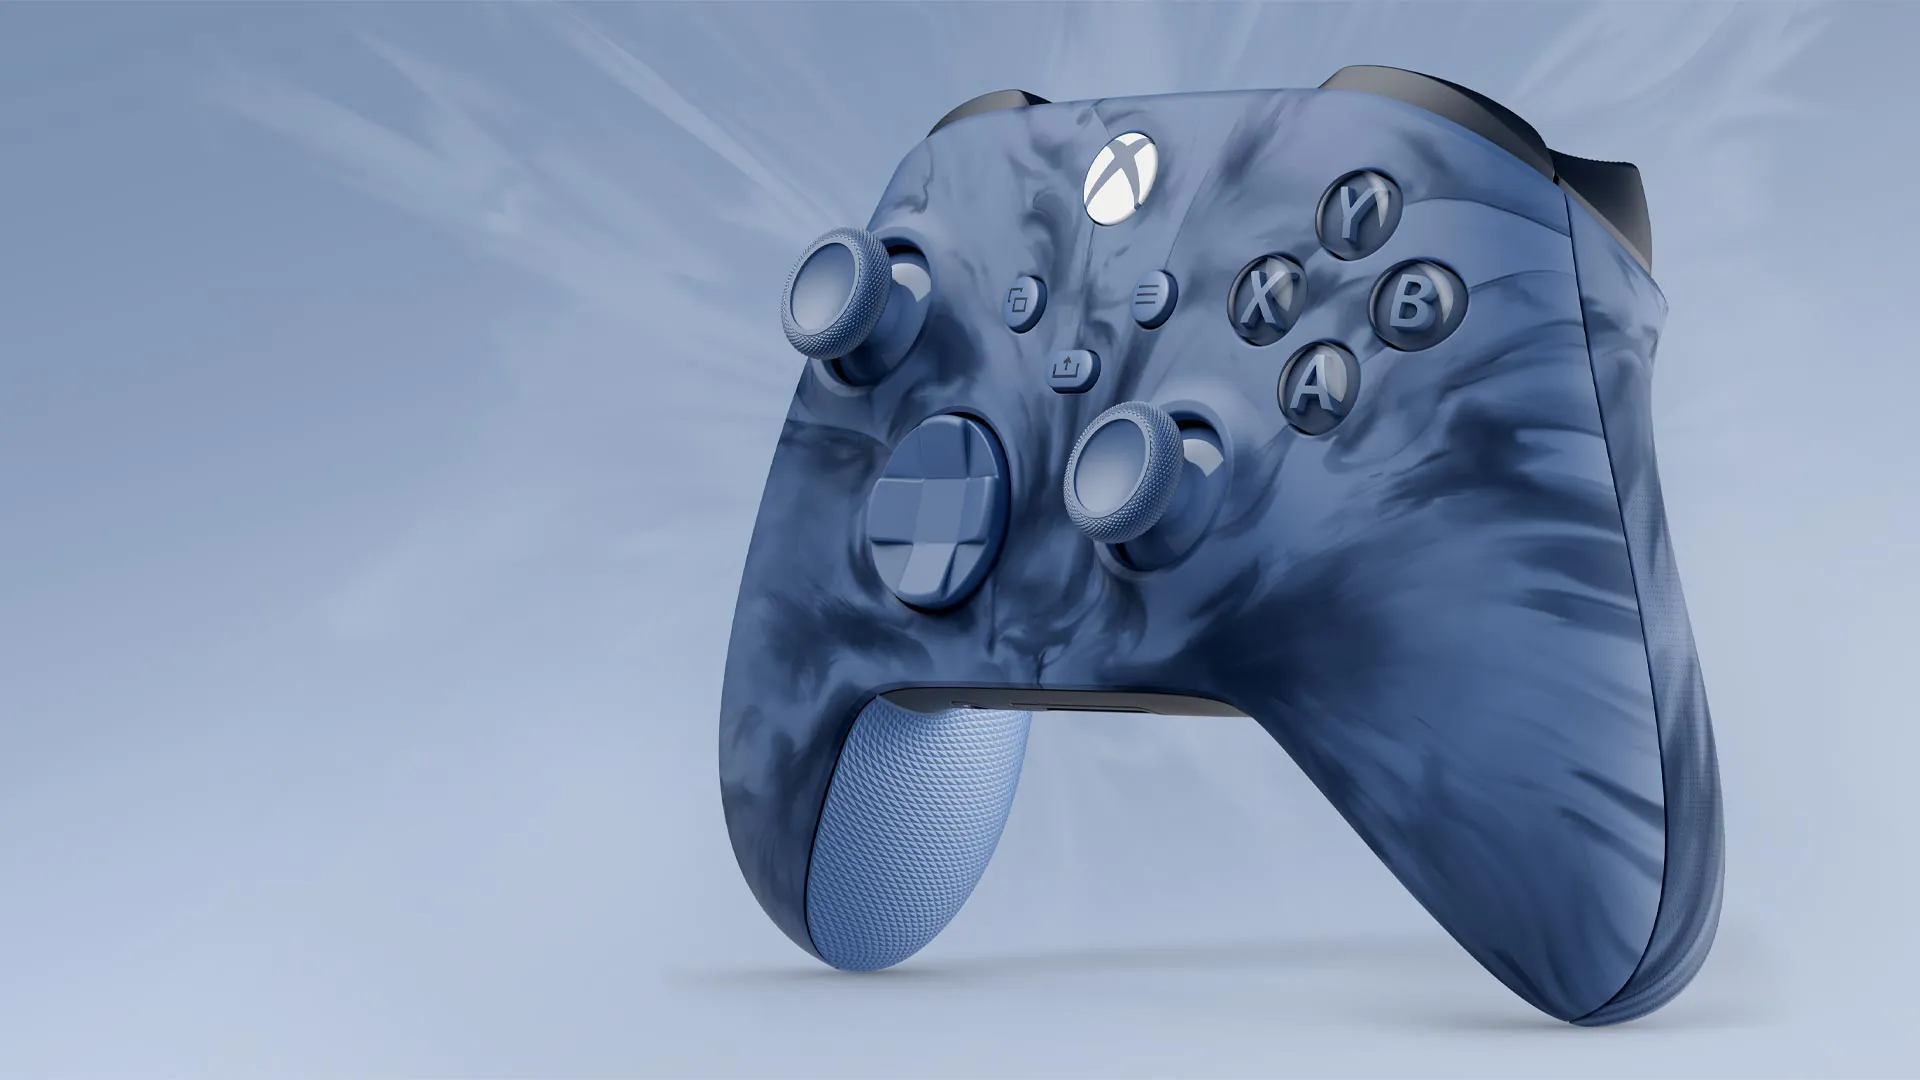 The Stormcloud Vapor Xbox Controller is here and it looks gorgeous